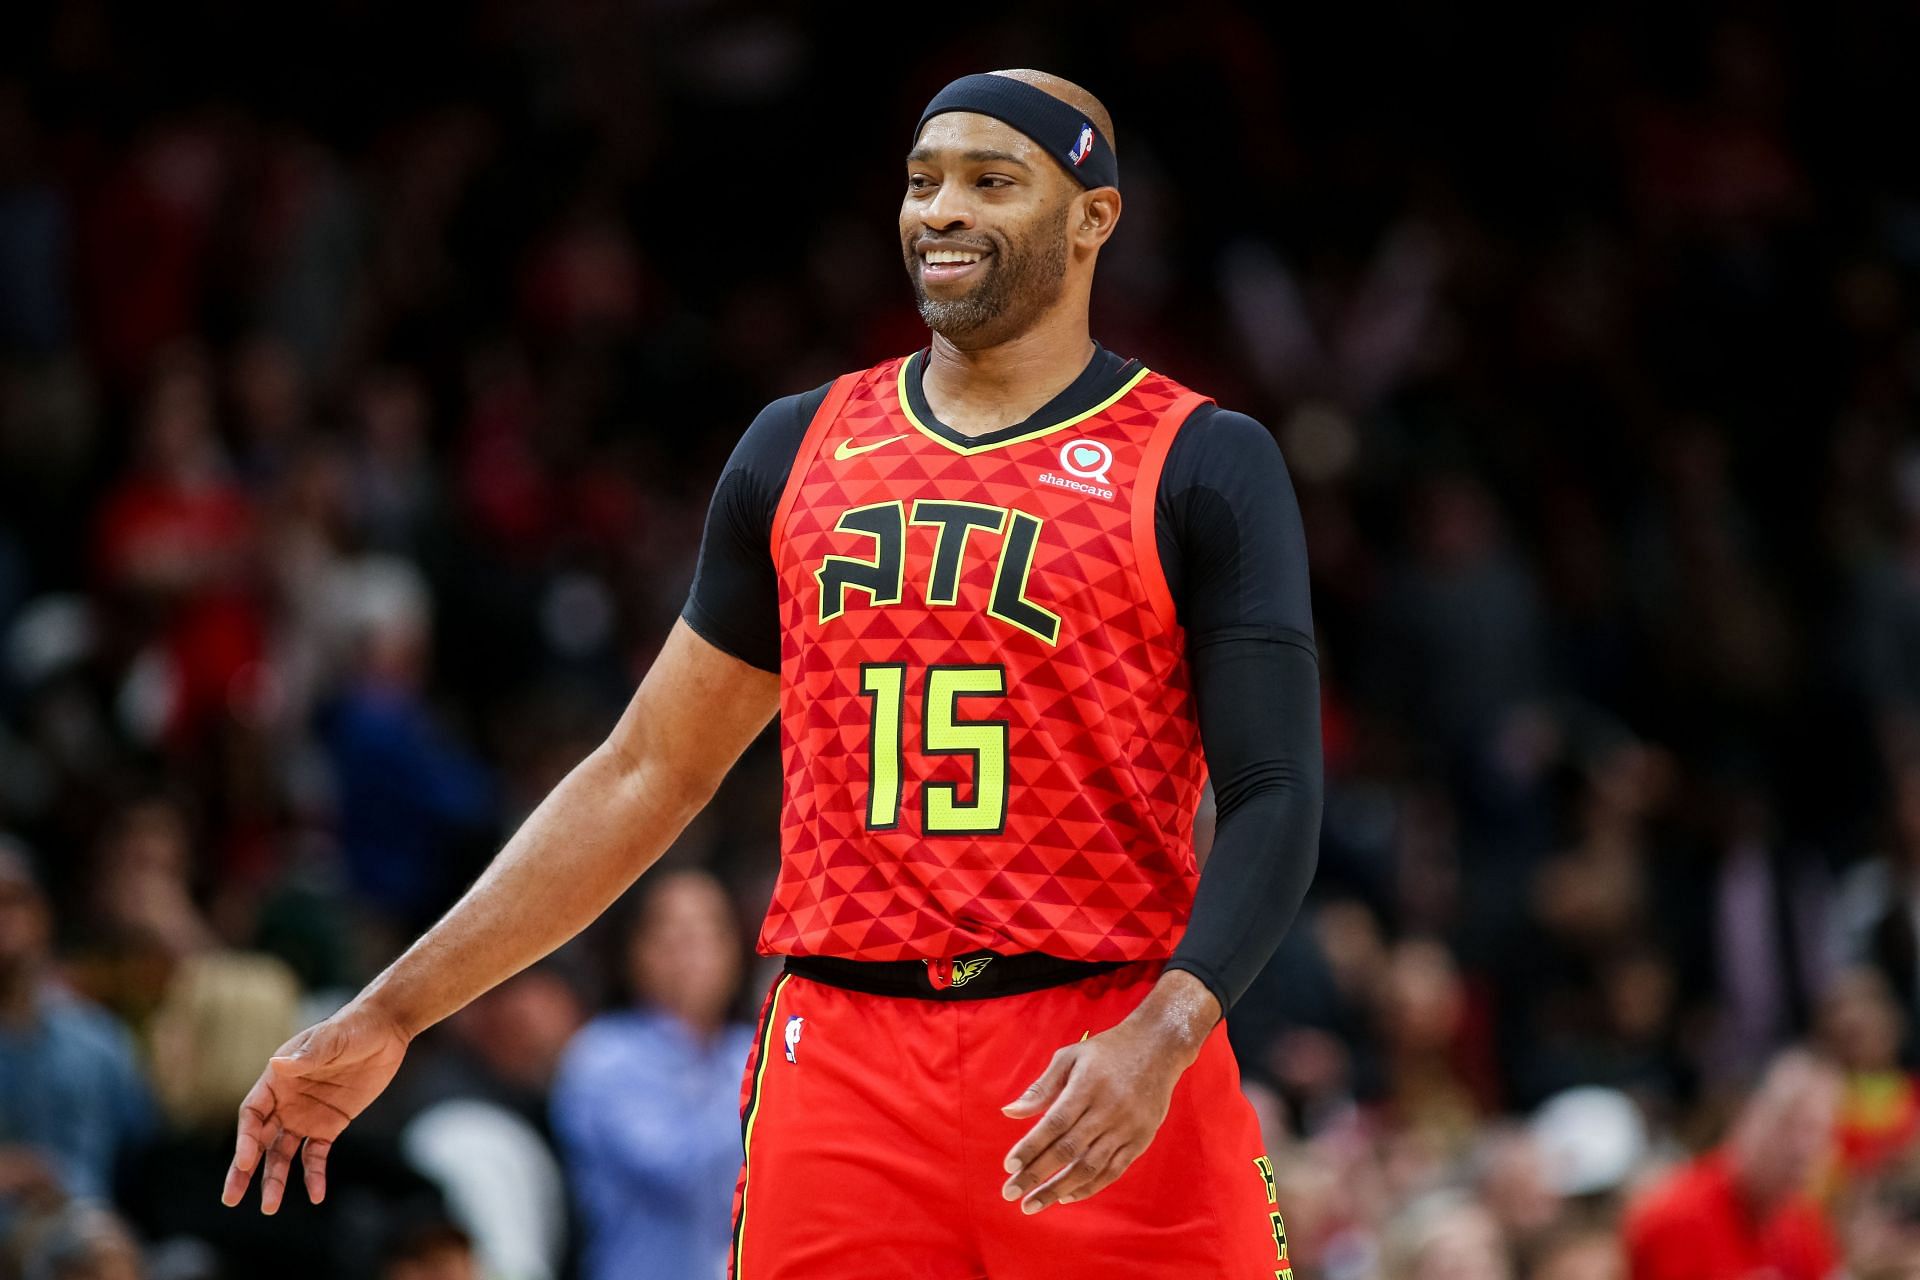 What is Vince Carter's net worth two years after retirement from